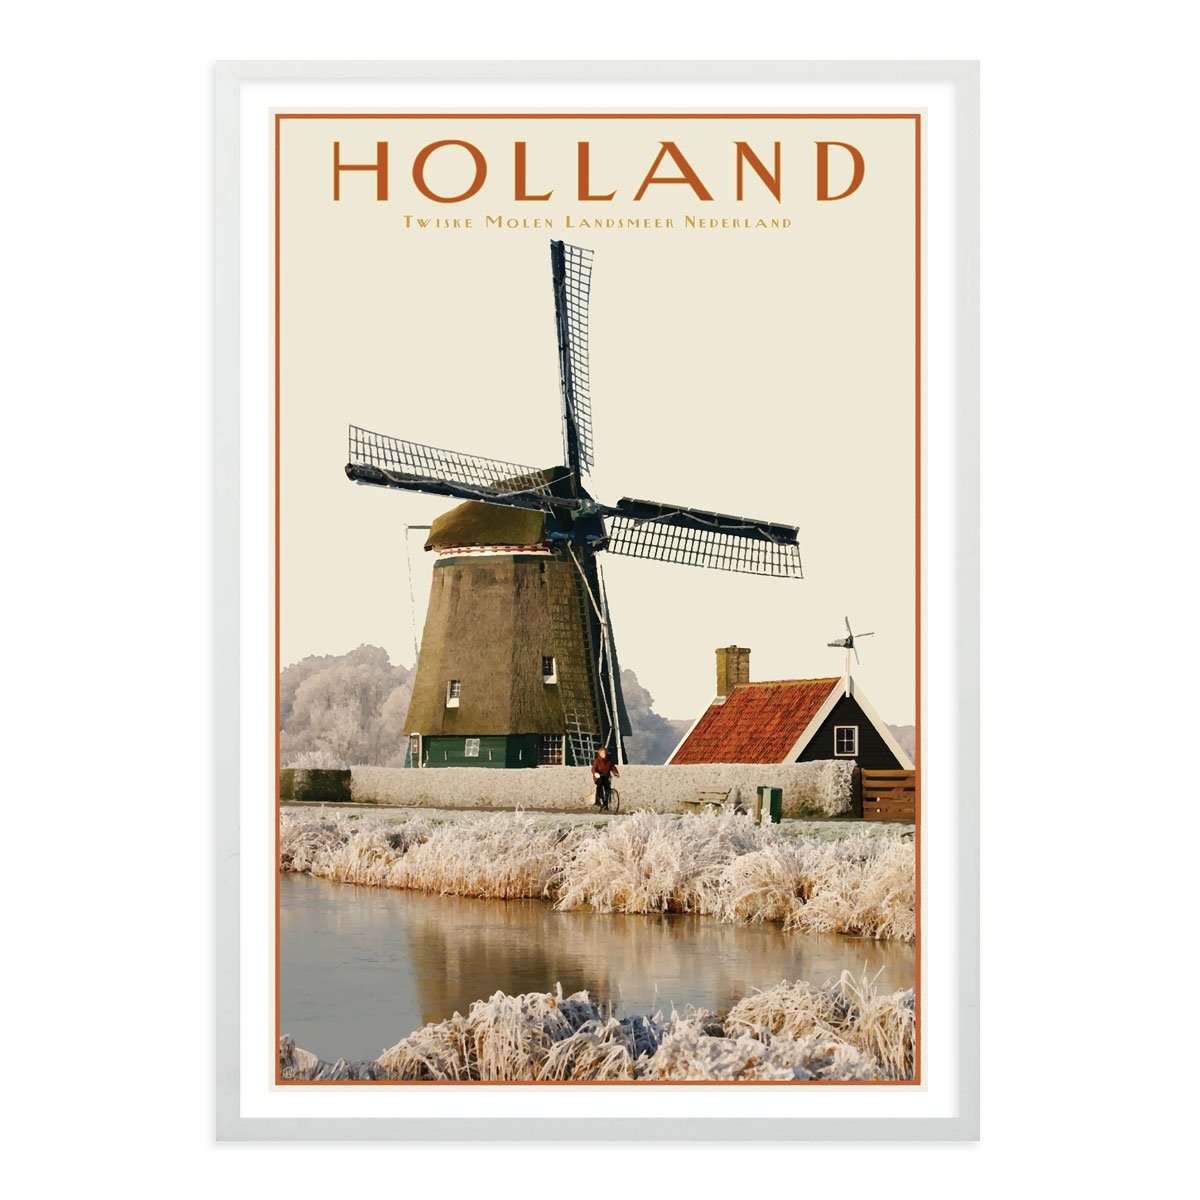 North Holland Windmill white framed print. Vintage travel style poster. Original design by places we luv